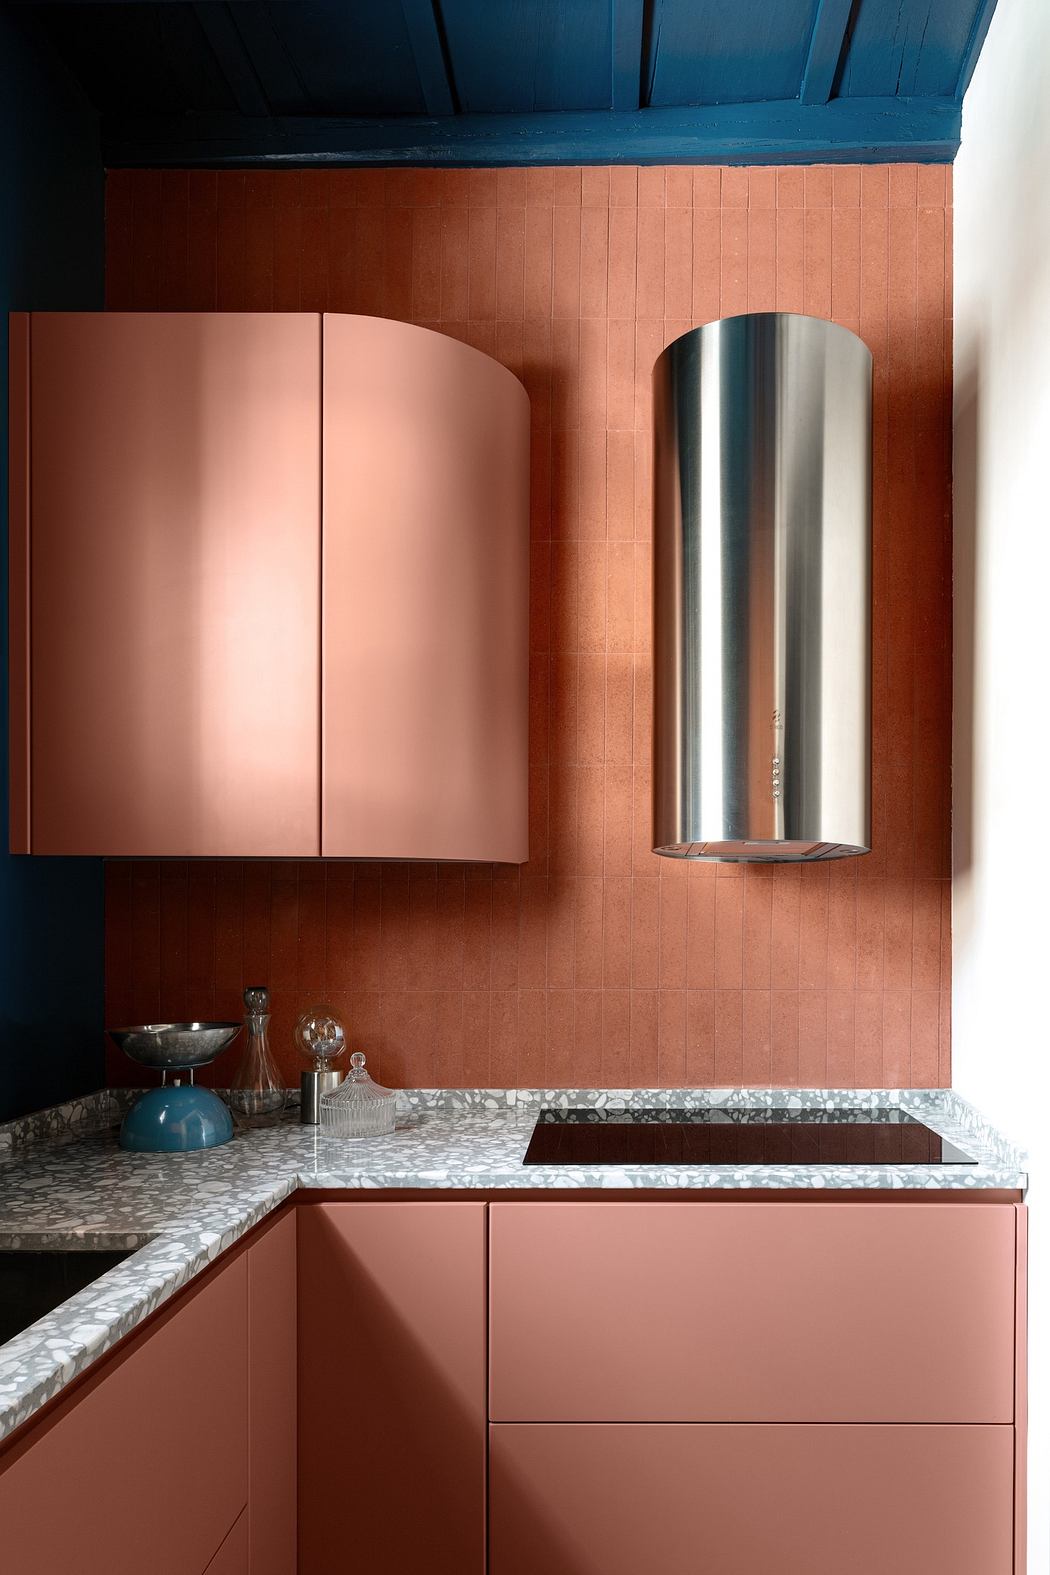 Modern kitchen with pink cabinets, terracotta walls, and blue ceiling.